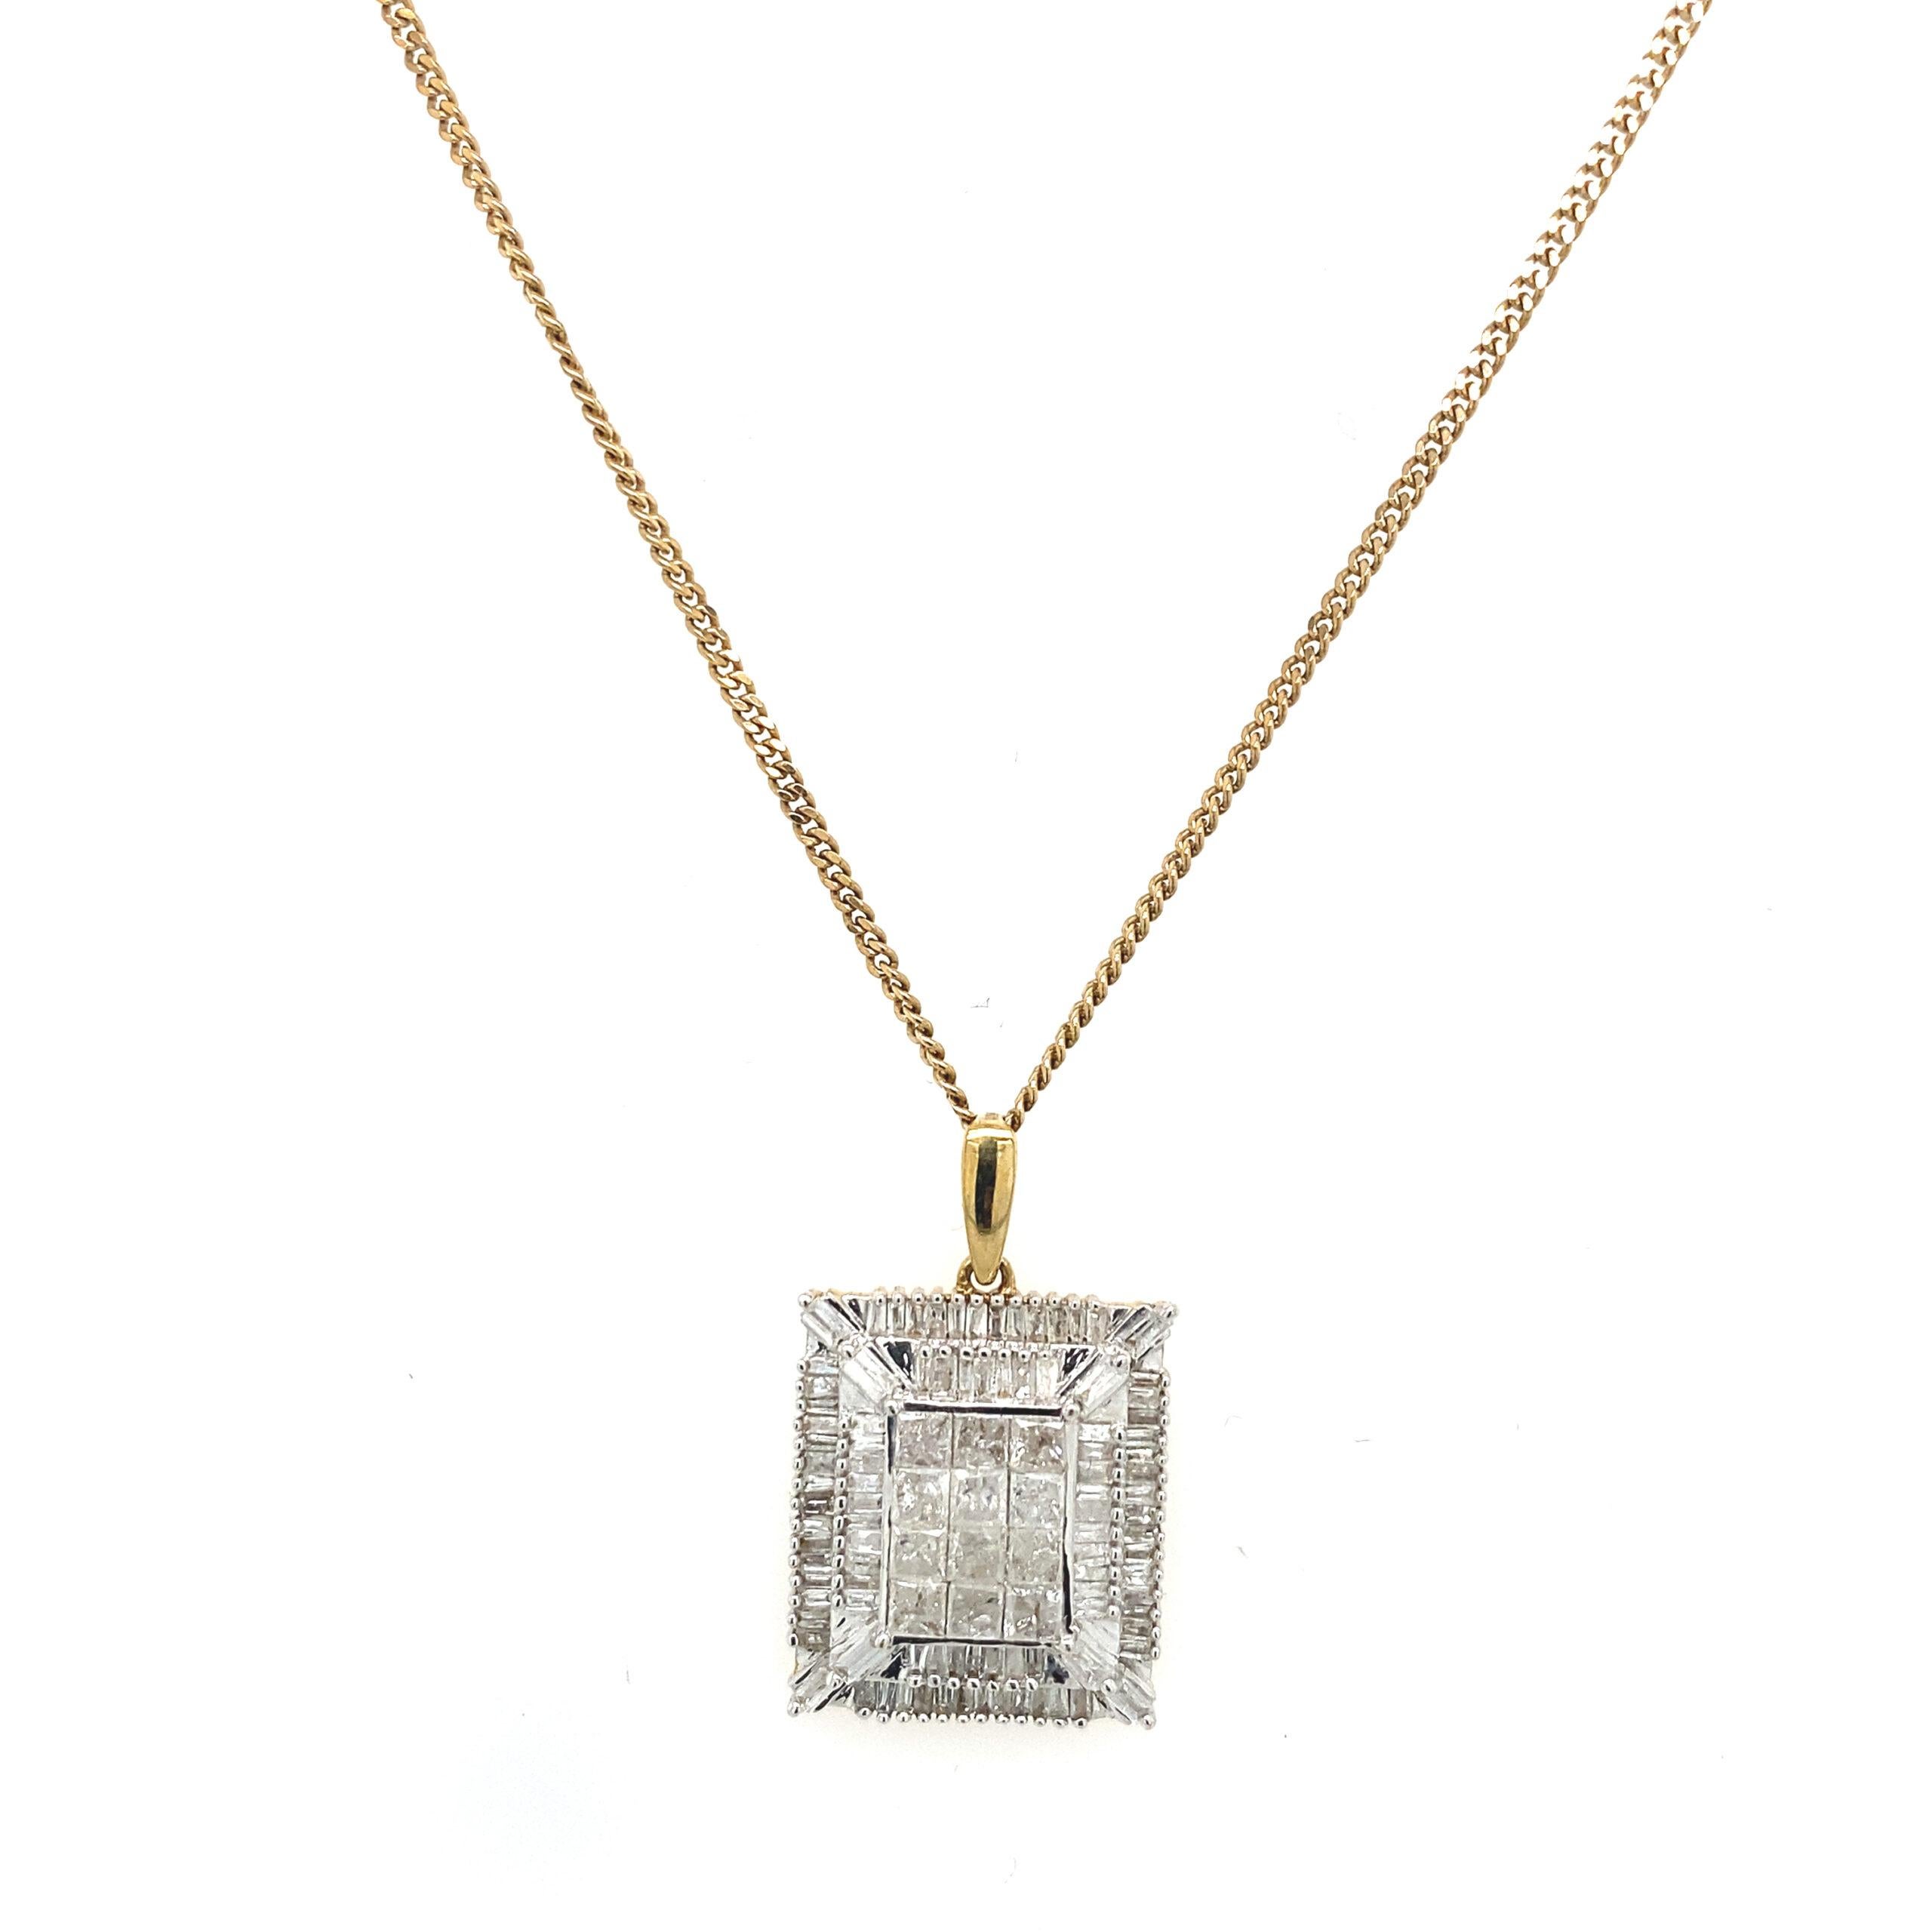 This pendant features a combination of baguette and princess cut Diamonds. The baguette Diamonds are on the top and bottom of the pendant and the princess cut Diamonds are in the middle. The combination of the Diamonds looks fantastic. The Diamonds